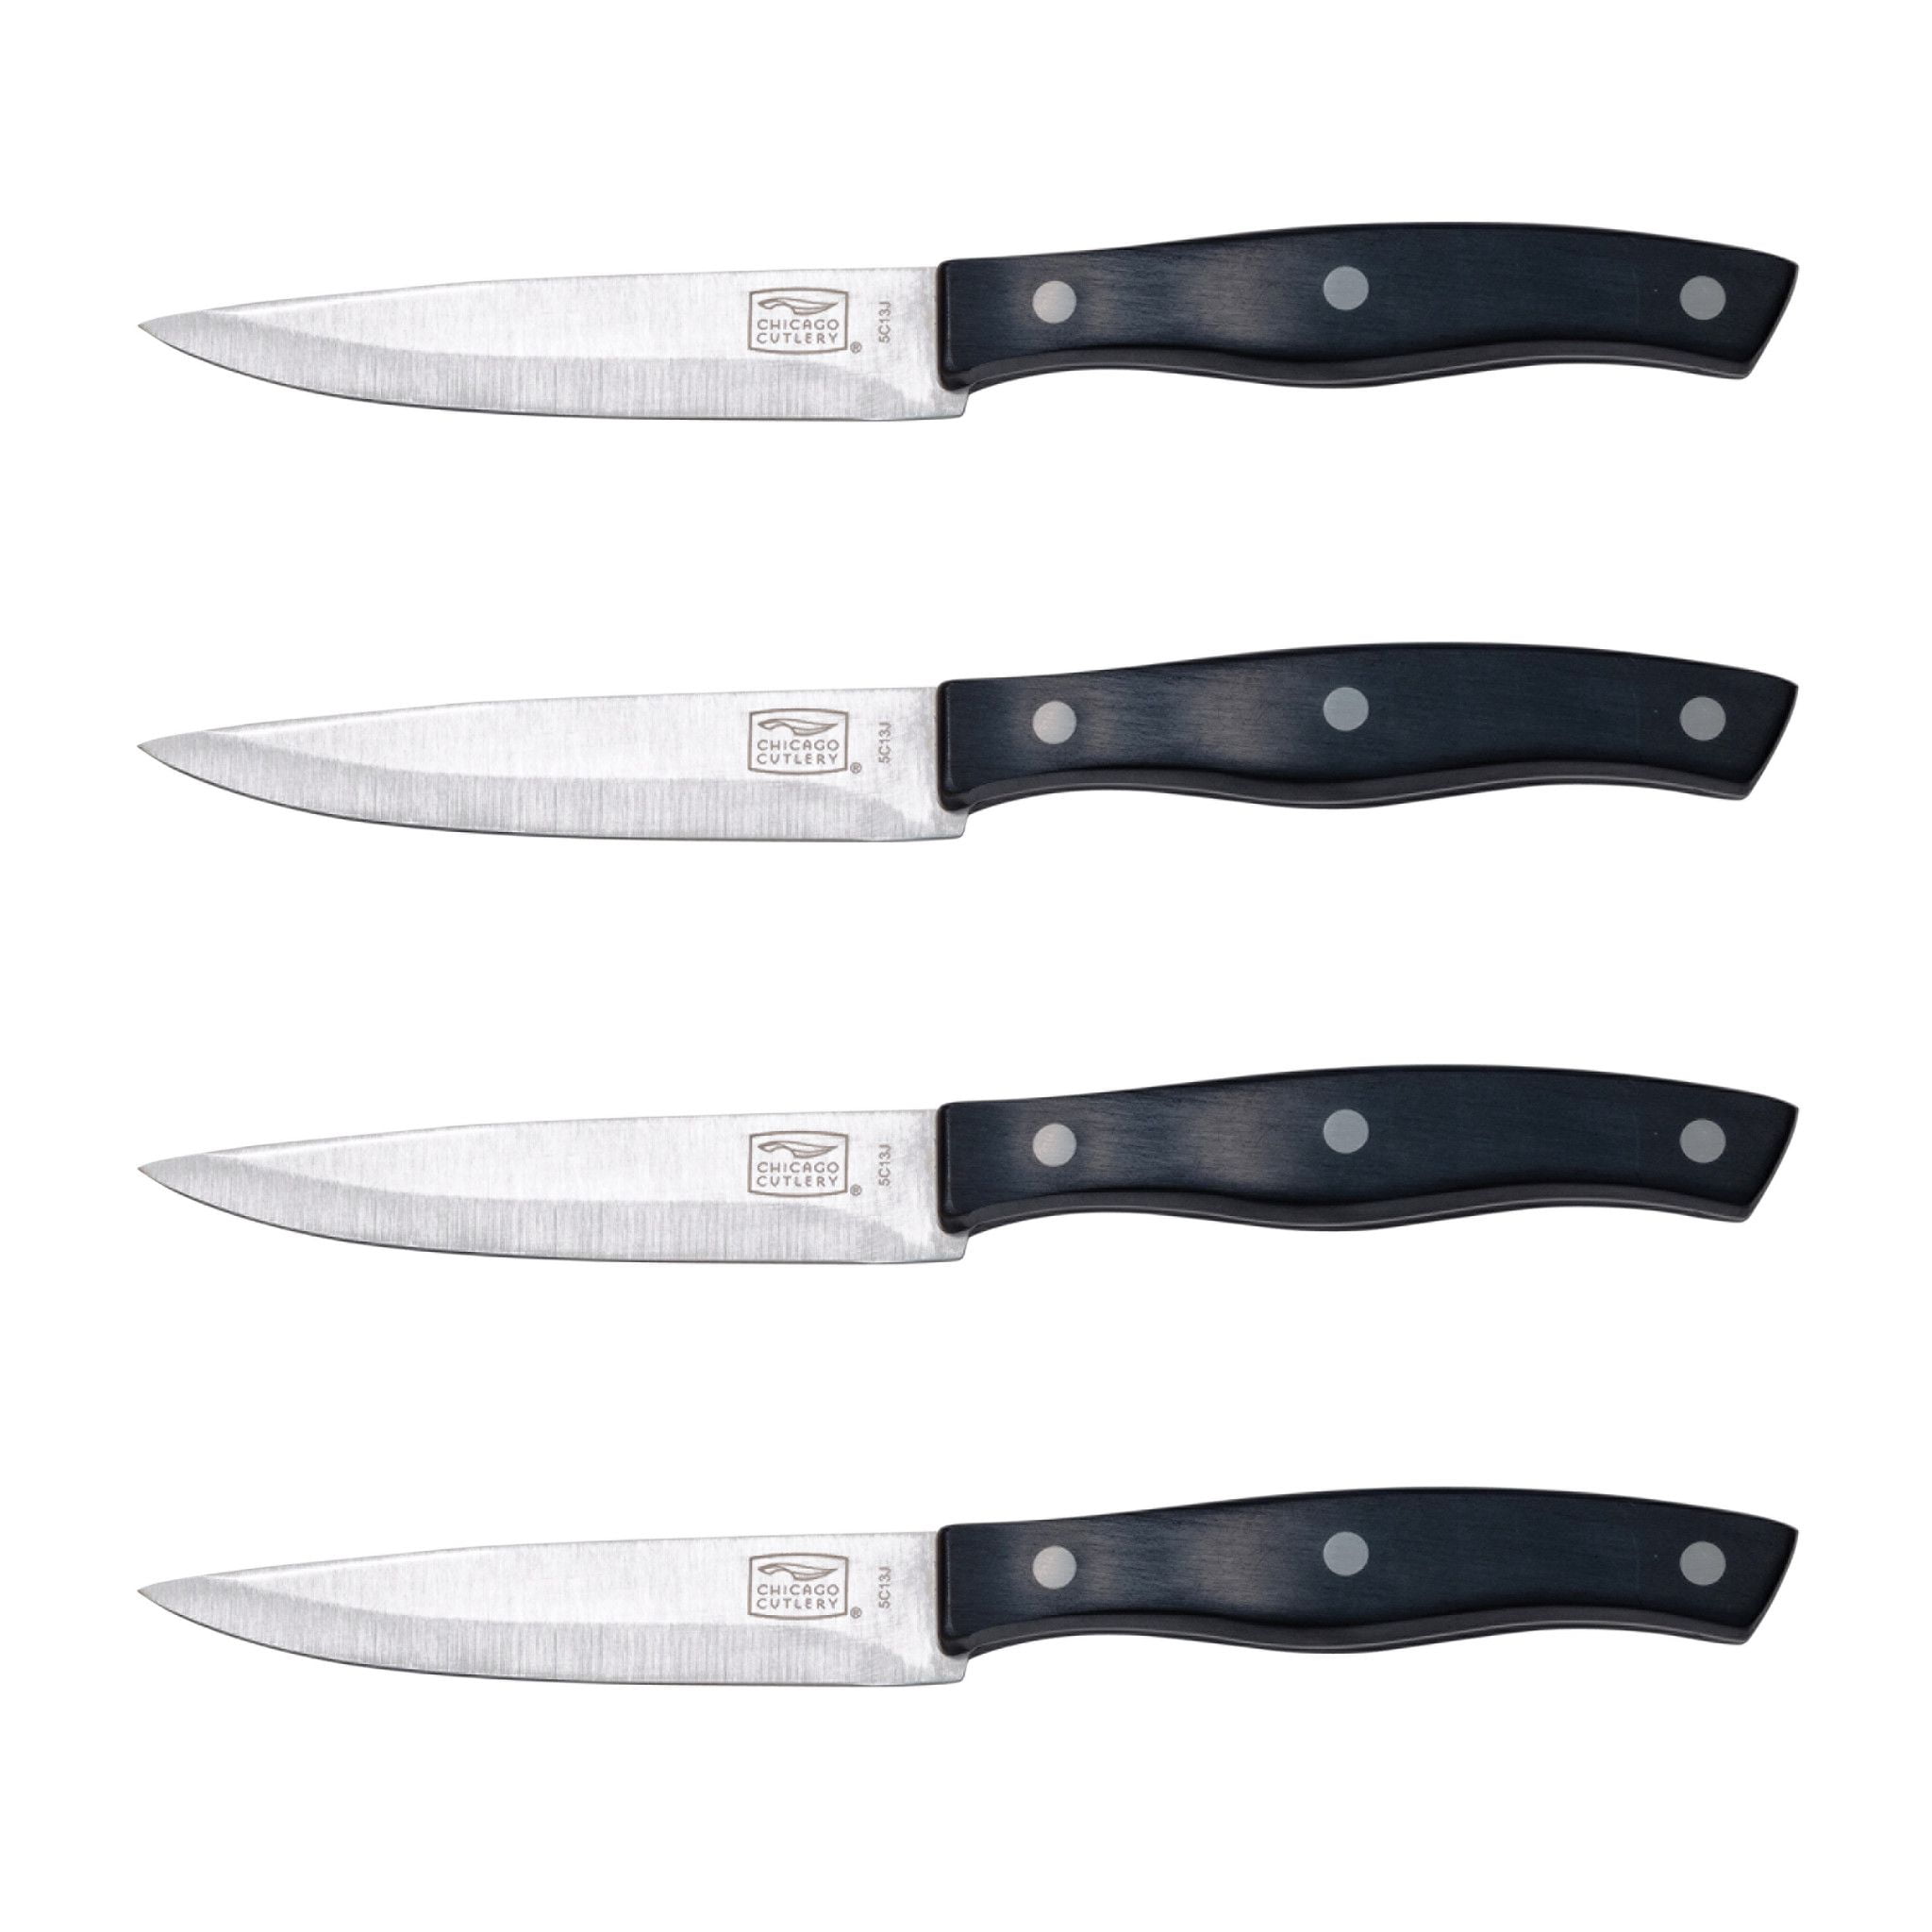 Chicago Cutlery Steak Knife Set  $1.36 Off Free Shipping over $49!